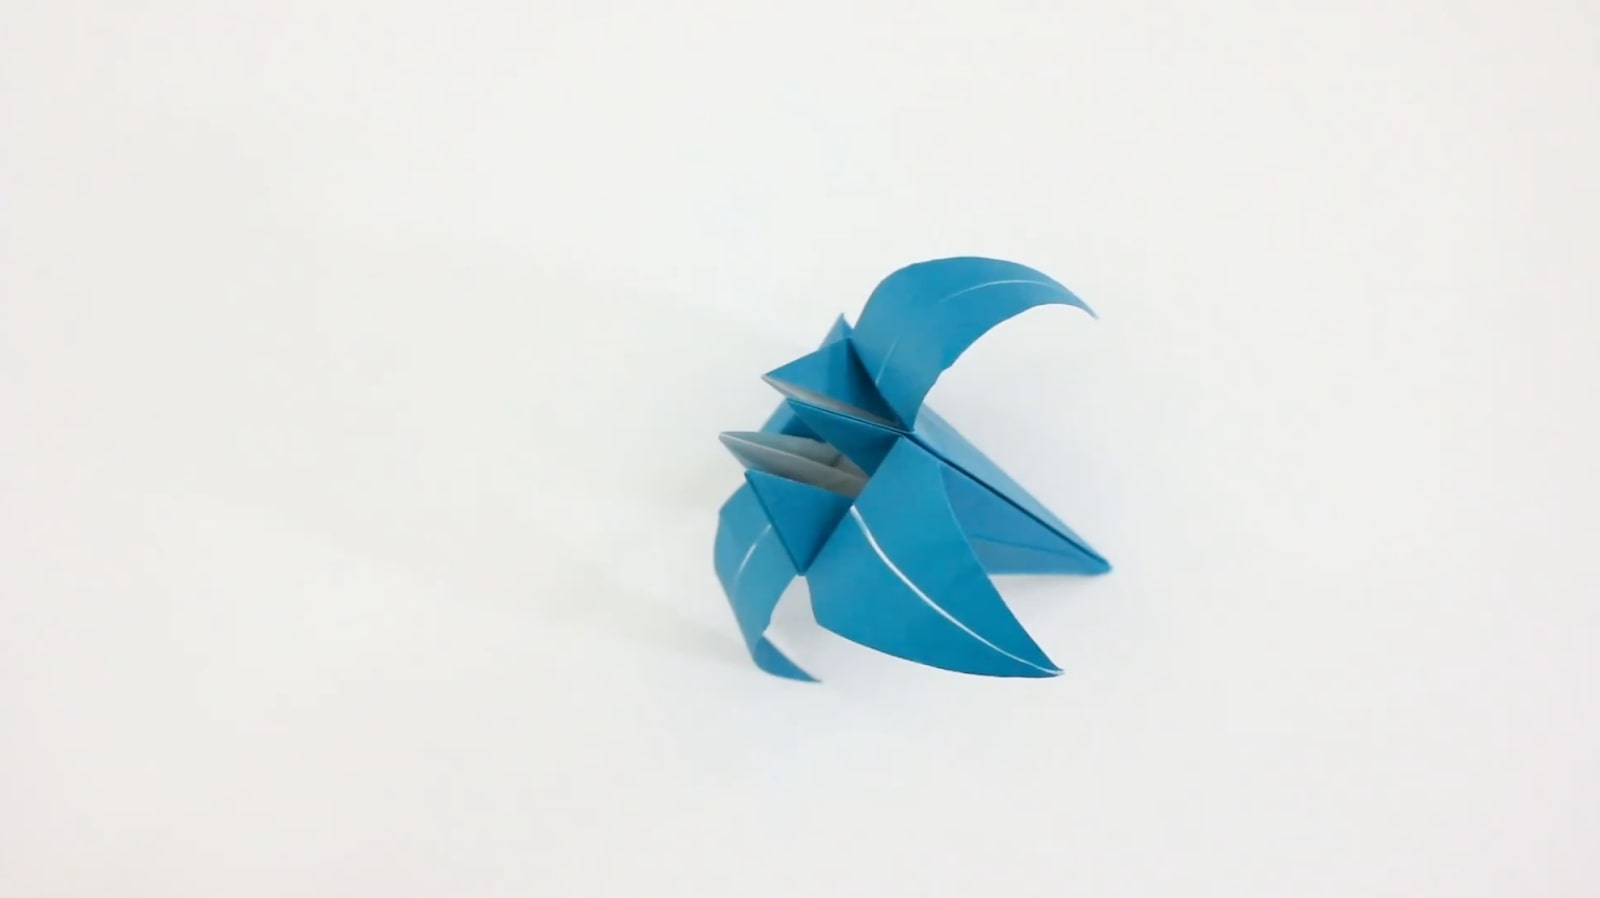 Paper Art, Painted Paper: 9 Paper Crafts to Try